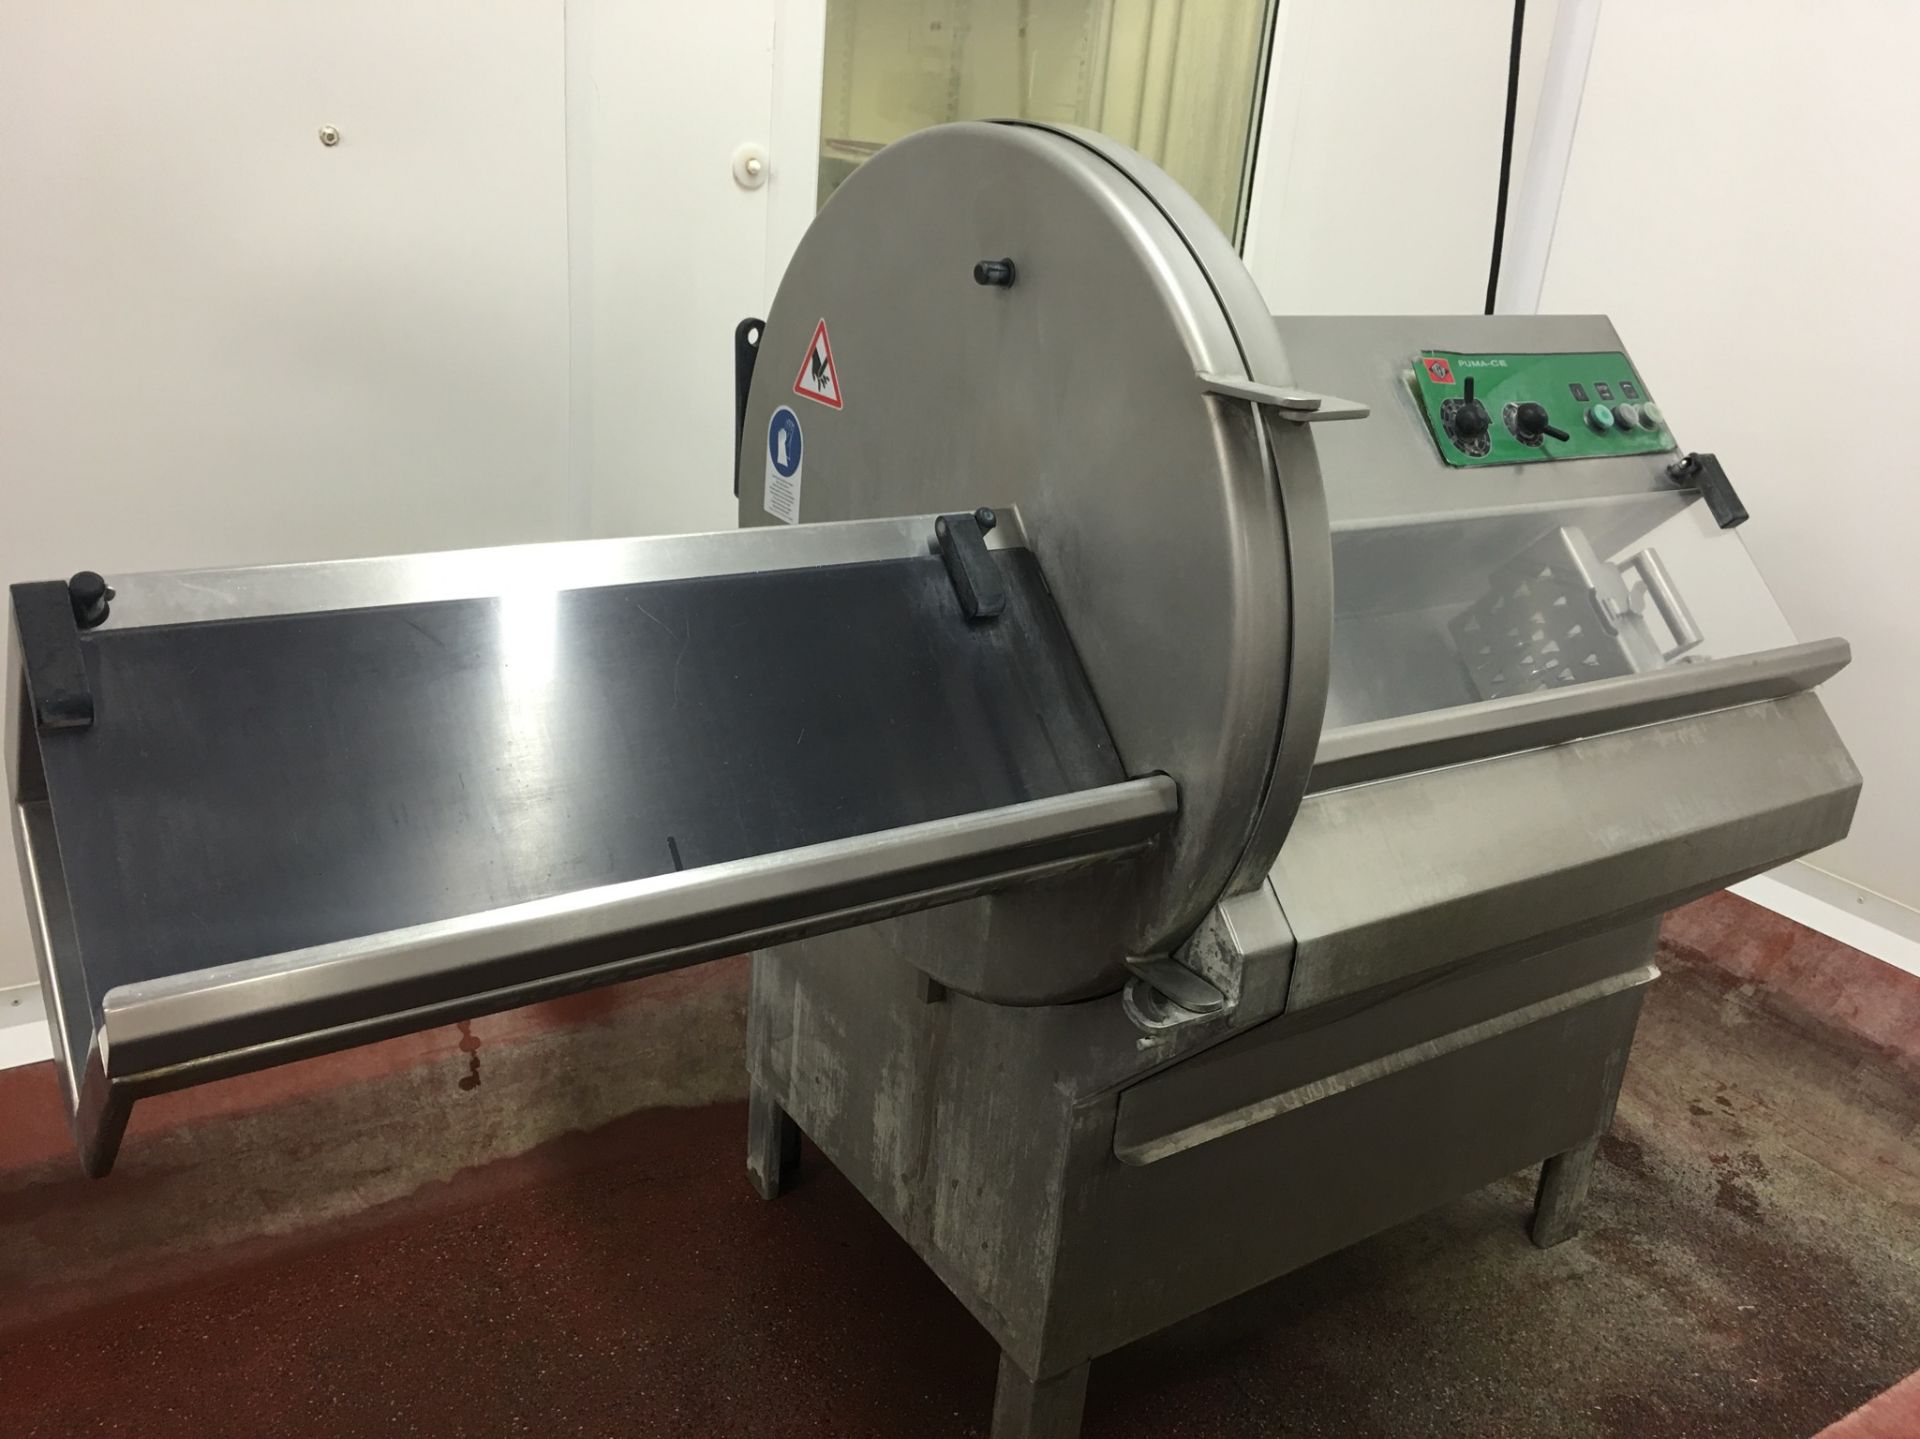 Treif Puma CE Slicer - Suitable for boneless and bone-in products such as bacon, spare ribs, chops